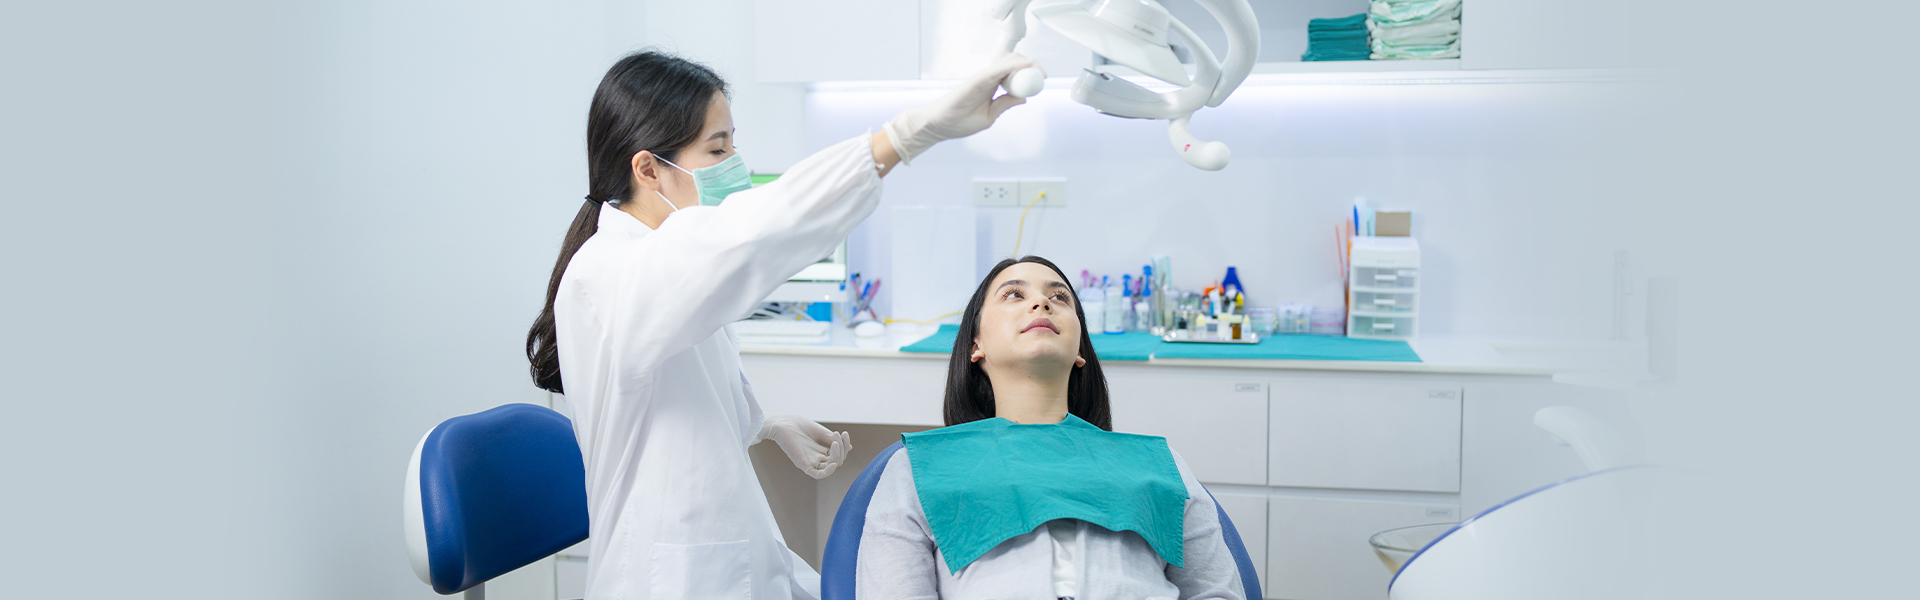 Dental Exams and Cleanings in Bristol, CT